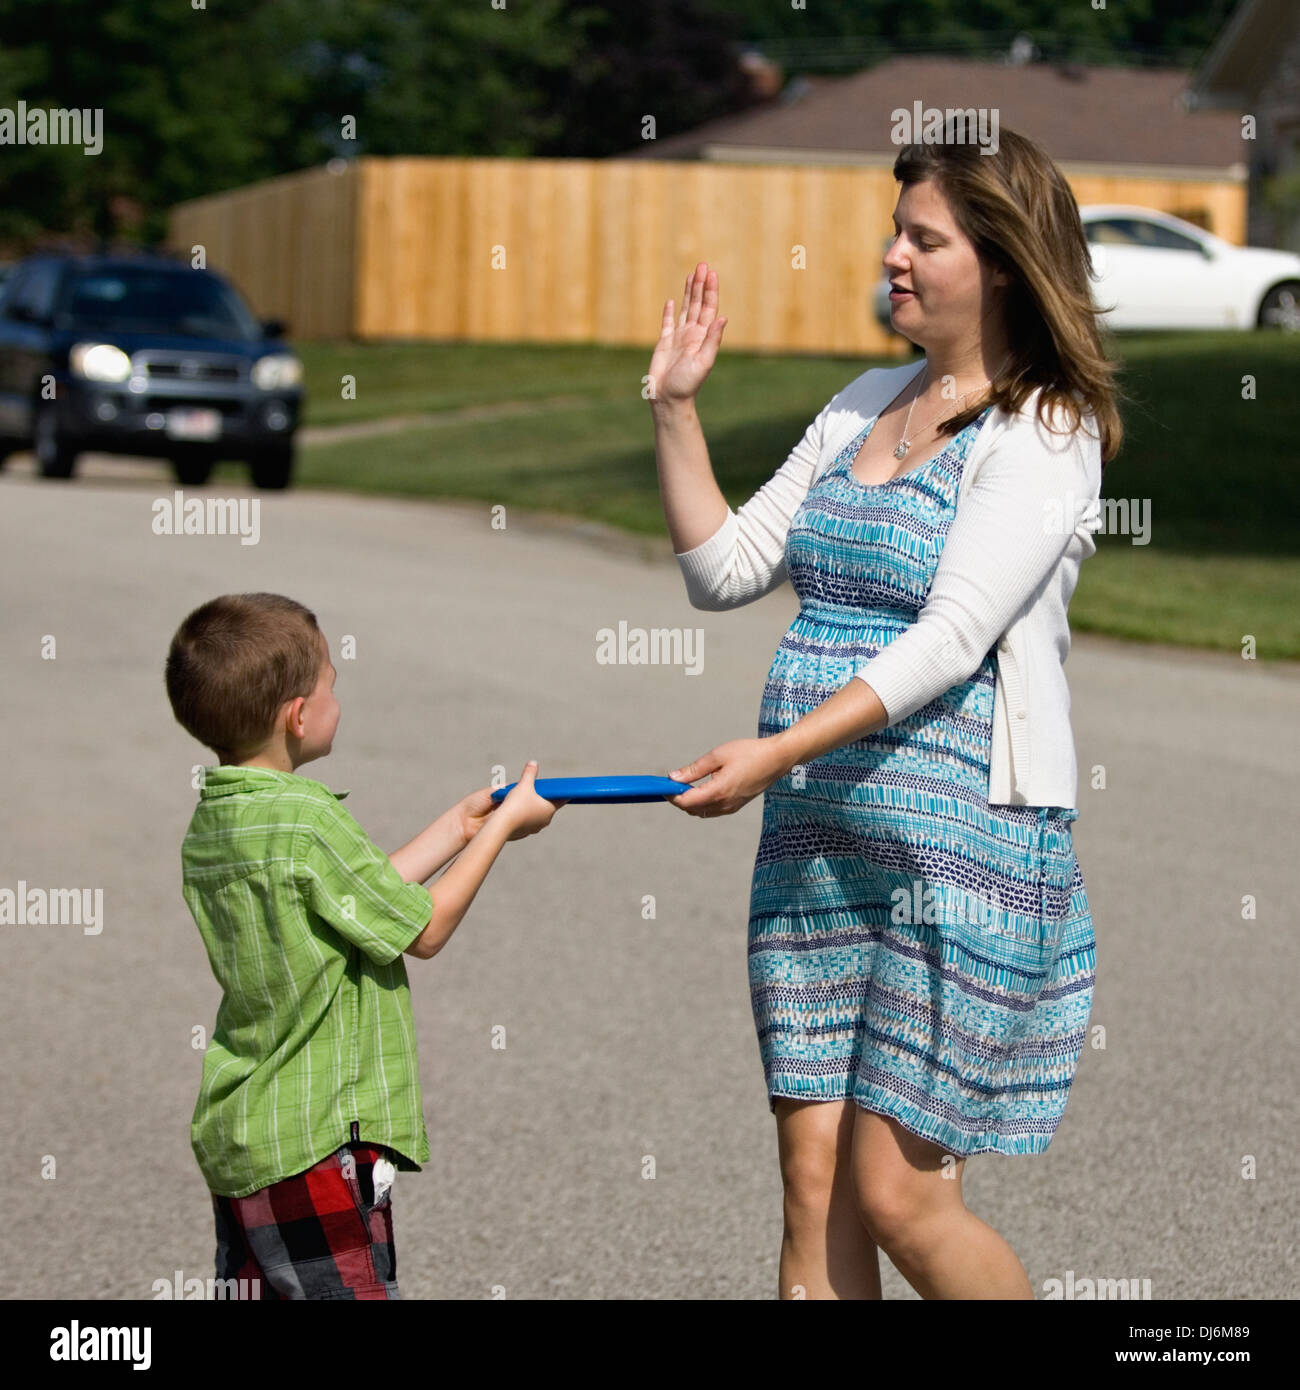 Pregnant Woman Giving a Frisbee to a Five Year Old Boy Stock Photo